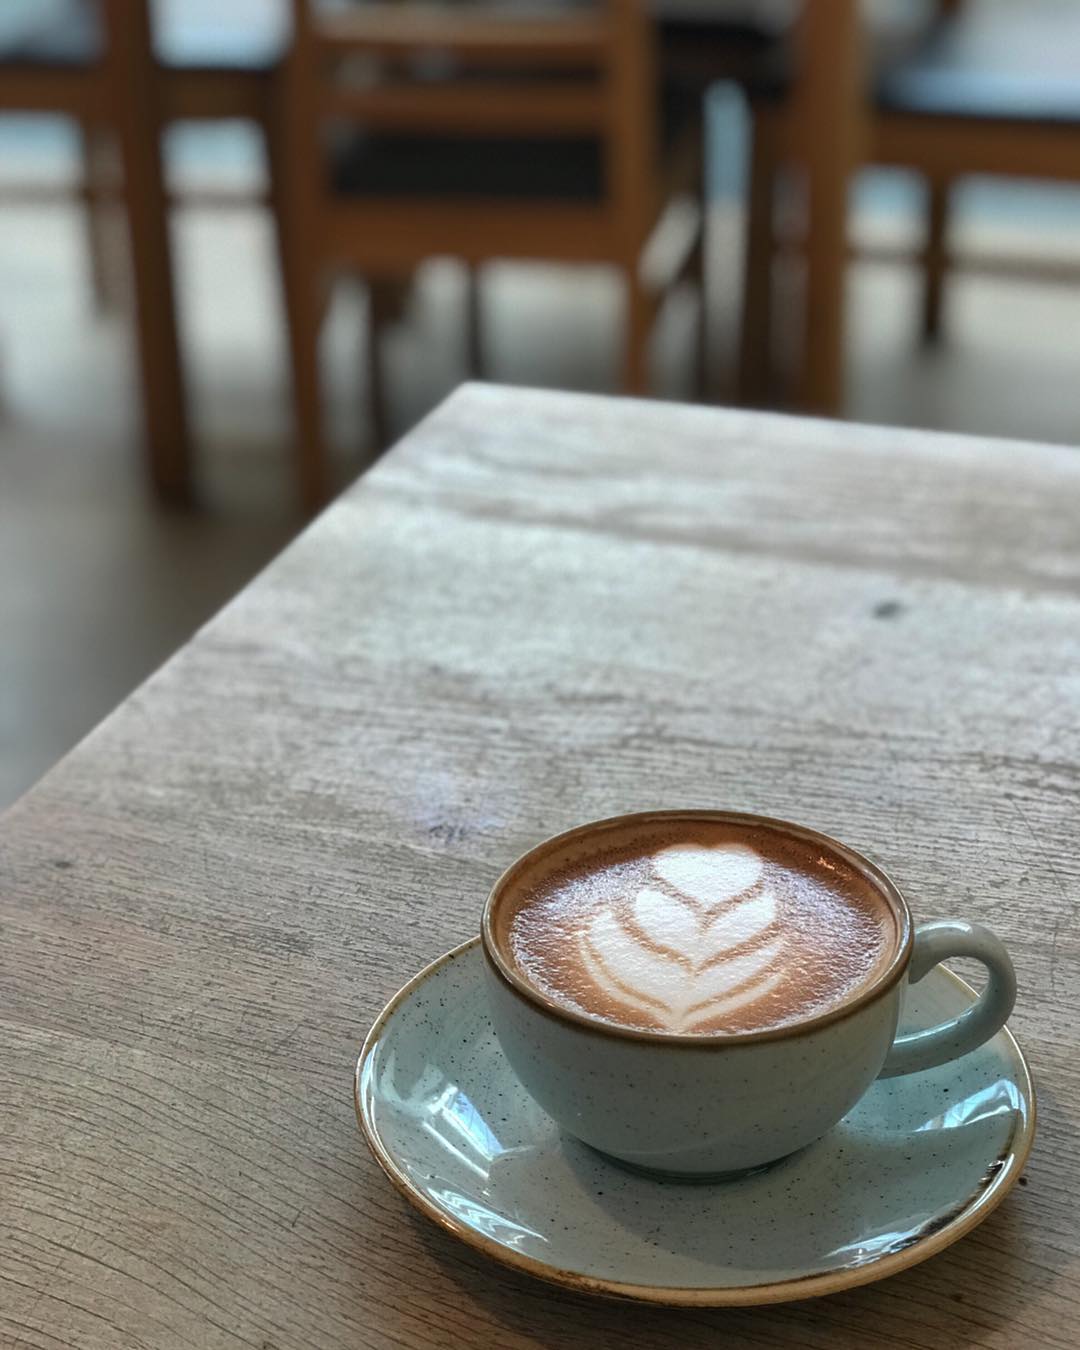 Come and treat yourself to a flat white this morning! You’ll also be supporting local businesses and farmers with Bruce and Luke’s Coffee + Local North Lakes Dairy Milk; a match made in heaven!! .
.
#food #drink #coffee #bruceandlukes #espresso #milk #farmers #localfarmers #flatwhite #cumbria #lakedistrict #penrith #penrithcumbria